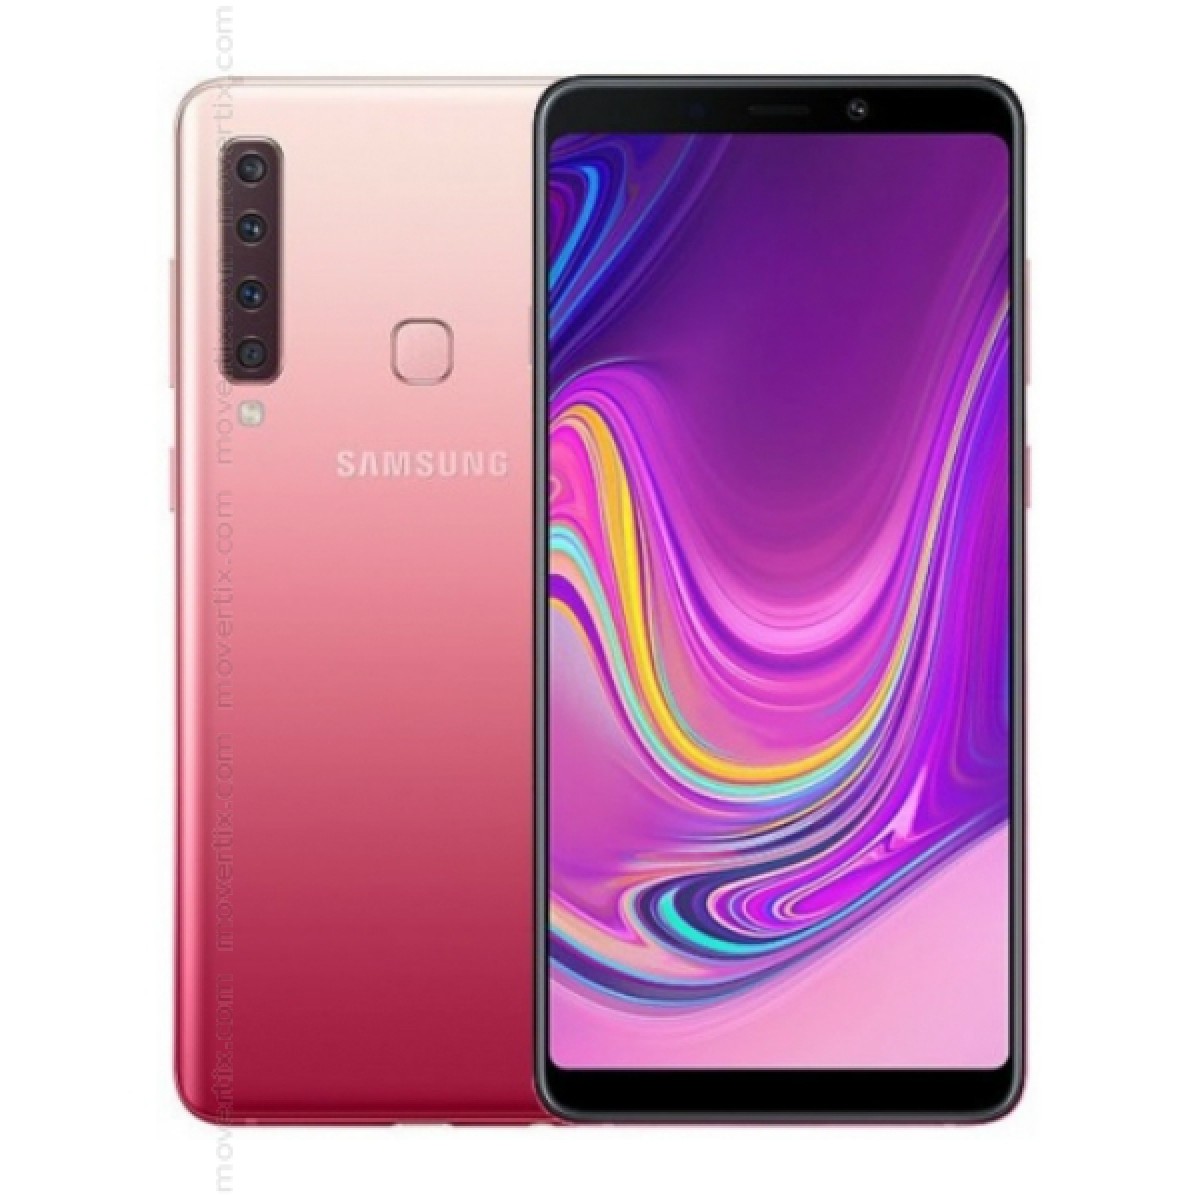 Samsung Galaxy A9 2018 Price & Specification | BY SMS